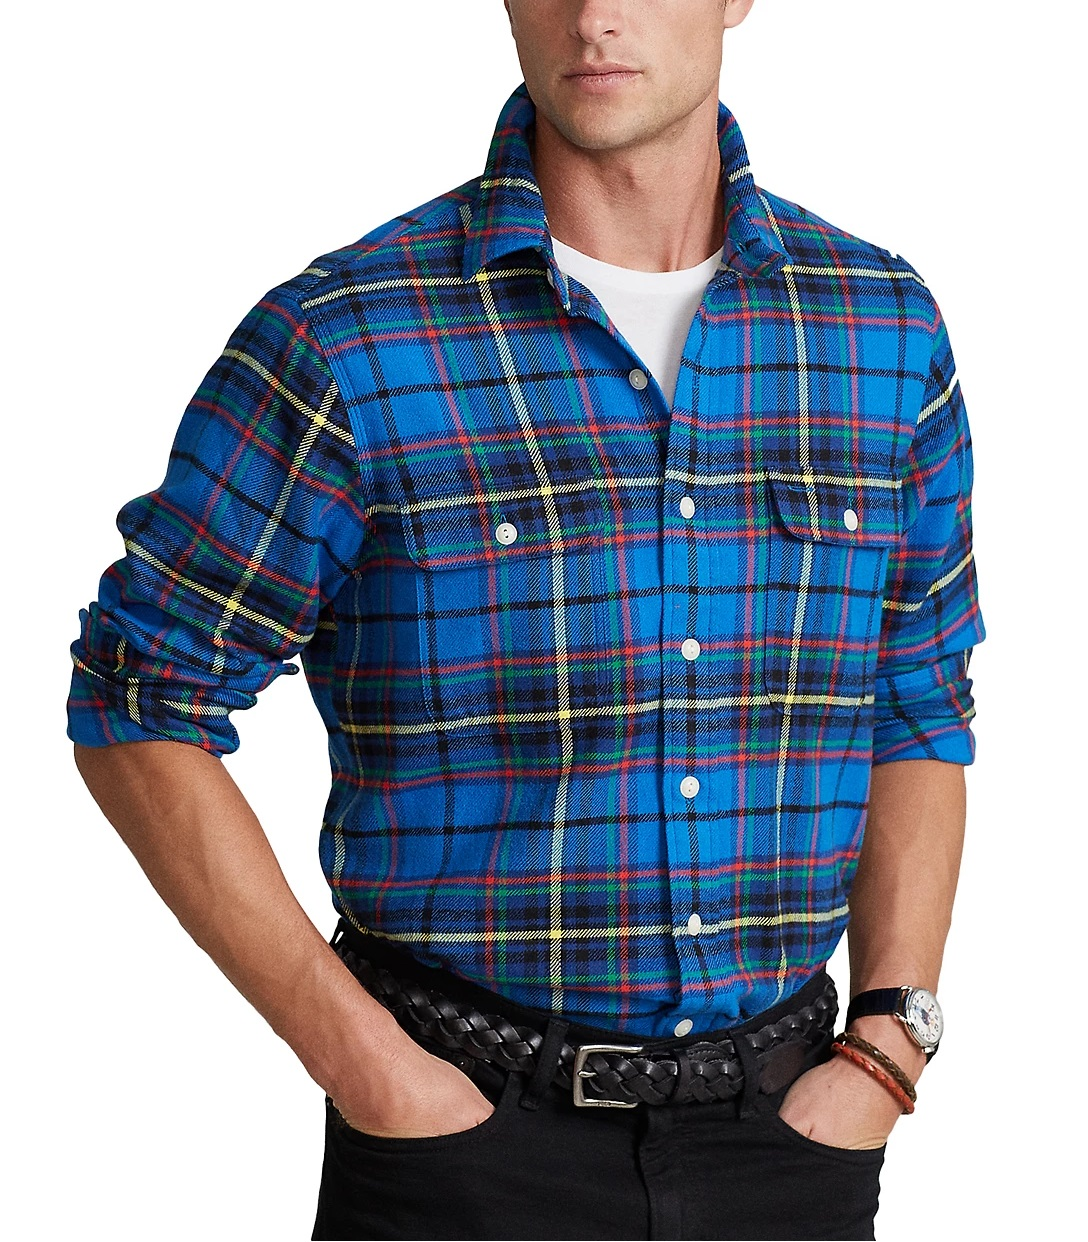 A person in a blue plaid shirtDescription automatically generated